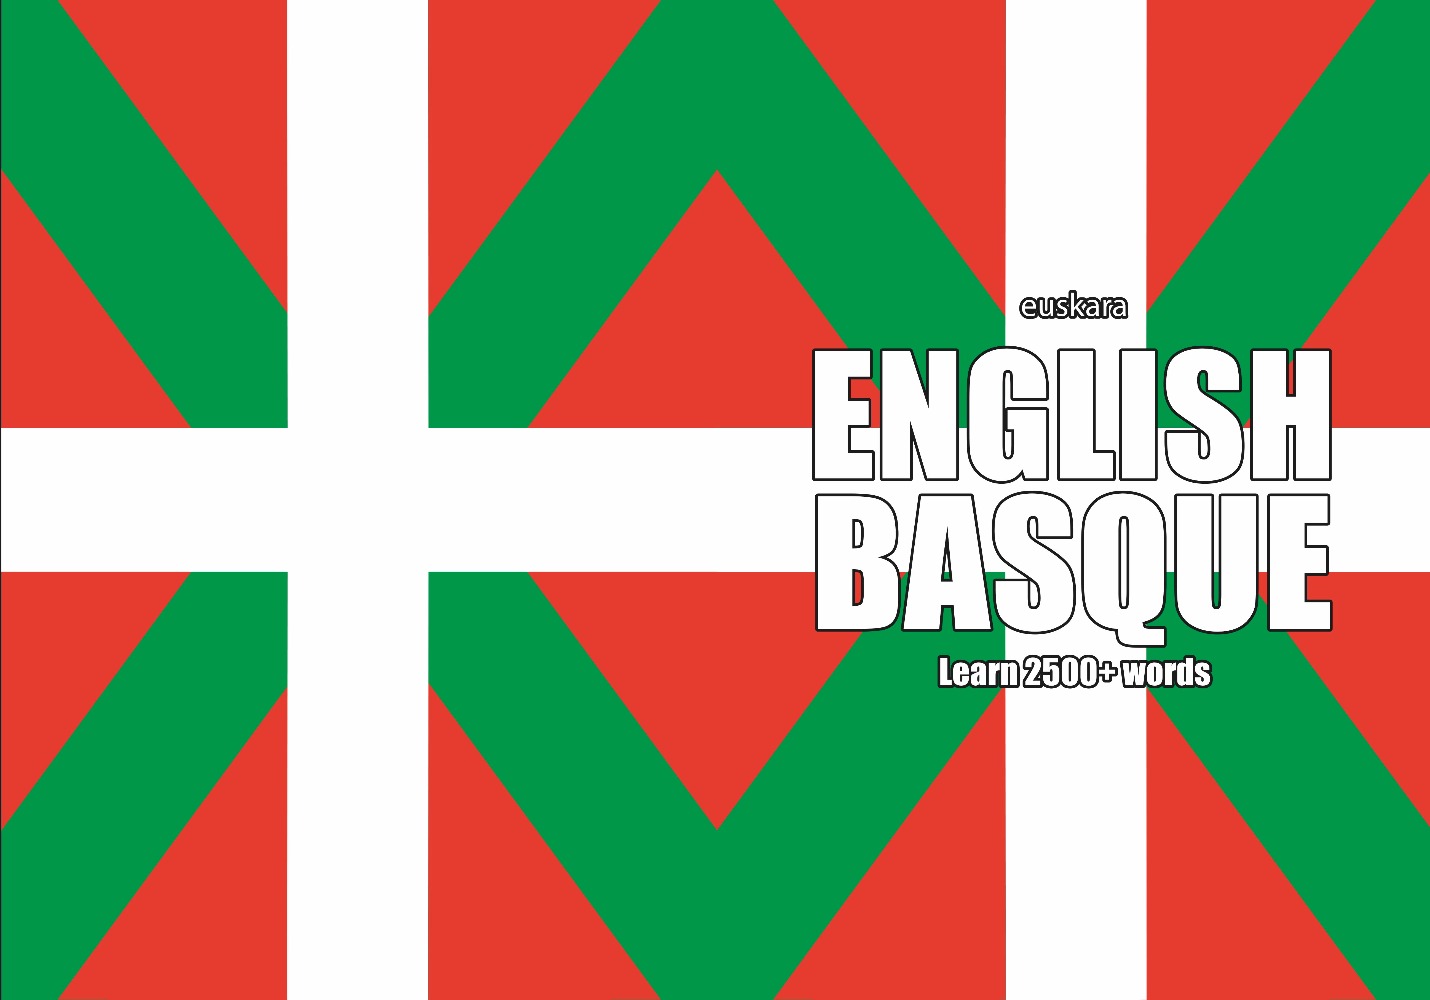 Basque language learning notebook cover